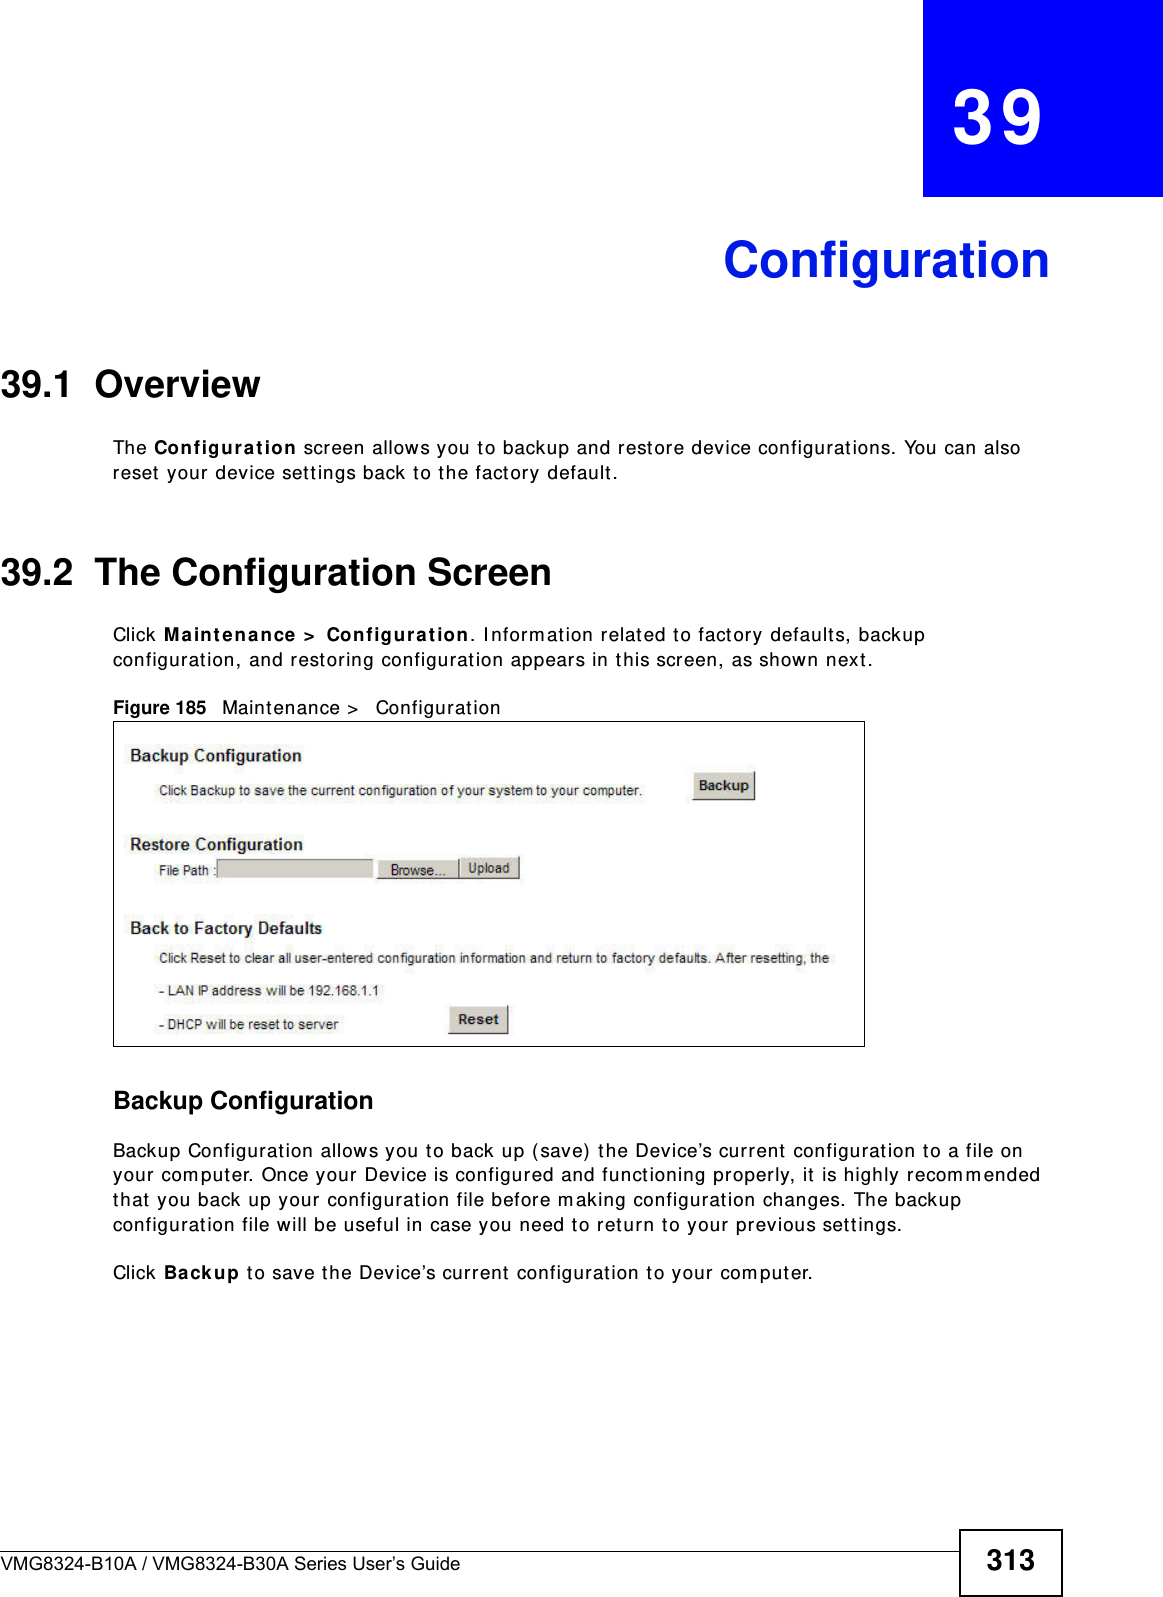 VMG8324-B10A / VMG8324-B30A Series User’s Guide 313CHAPTER   39Configuration39.1  OverviewThe Configur at ion screen allows you to backup and rest ore device configurat ions. You can also reset  your device set tings back to the factory default.39.2  The Configuration Screen Click M a in t en ance  &gt;  Configu rat ion. I nform ation related t o fact ory defaults, backup configurat ion, and rest oring configurat ion appears in t his screen, as shown next .Figure 185   Maintenance &gt;   Configurat ionBackup Configuration Backup Configuration allows you t o back up (save) the Device’s current  configuration to a file on your com puter. Once your Device is configured and funct ioning properly, it is highly recom m ended that  you back up your configuration file before m aking configurat ion changes. The backup configurat ion file will be useful in case you need to return to your previous sett ings. Click Backu p t o save the Device’s current configuration to your com put er.